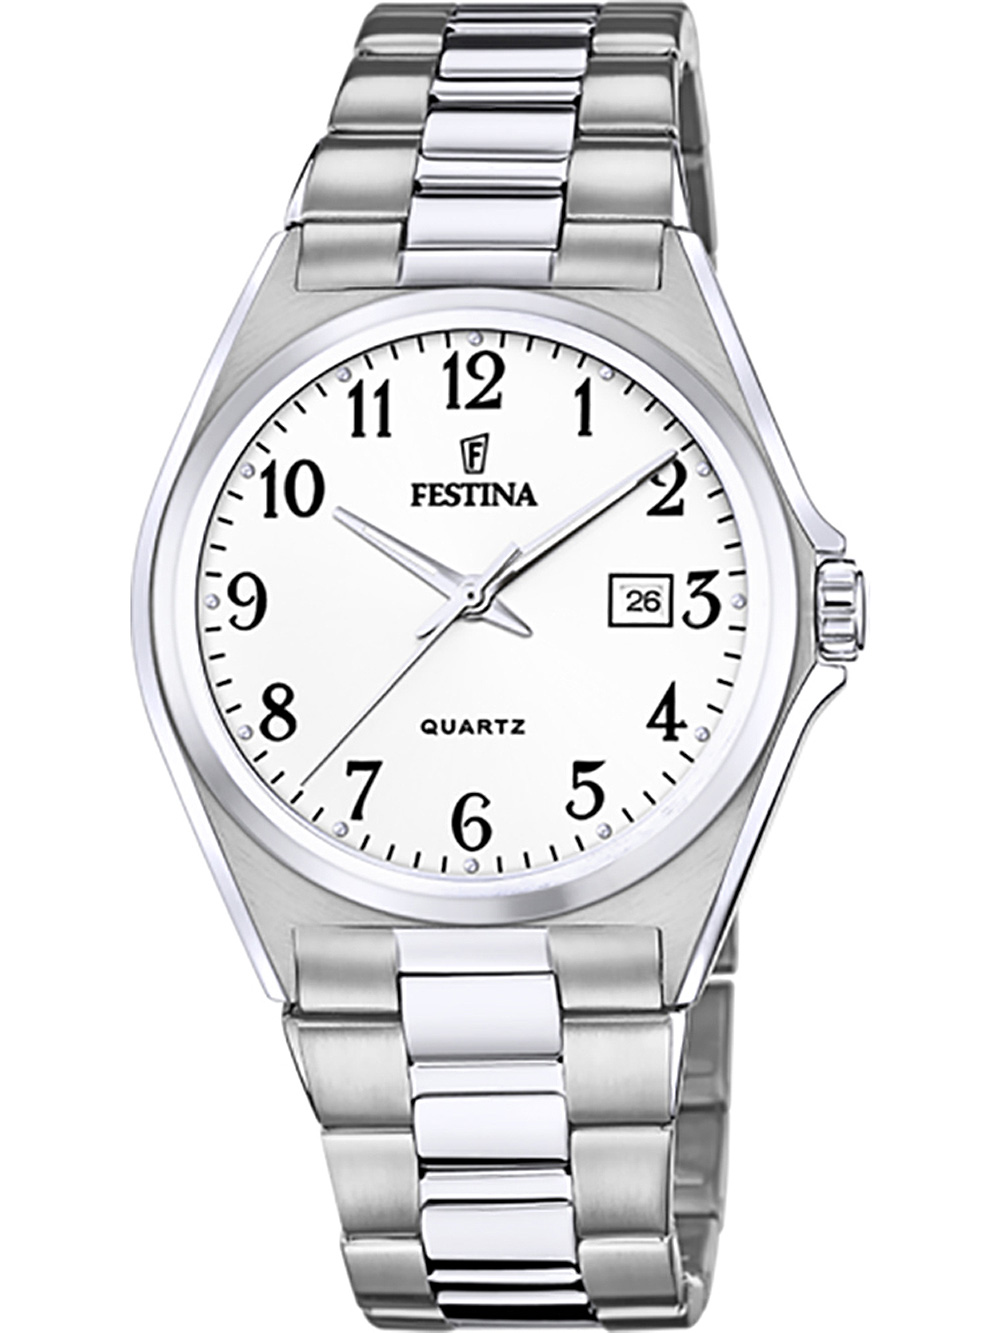 fast FESTINA free! cheap, postage Watches: buy get &